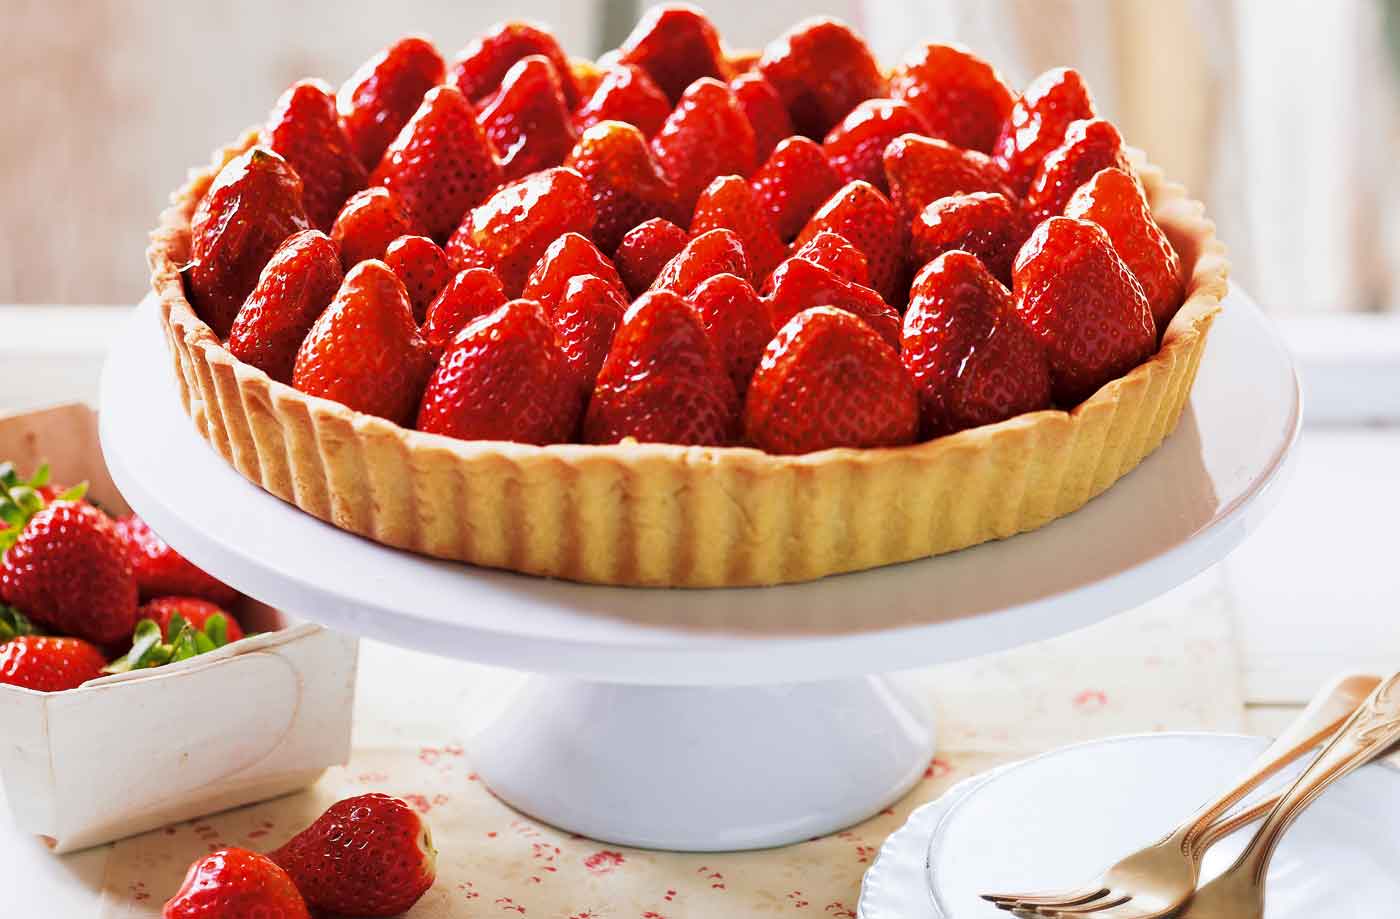 🍰 We Know Which Cake Represents Your Personality Based on the Bakery Items You Choose Strawberry tart